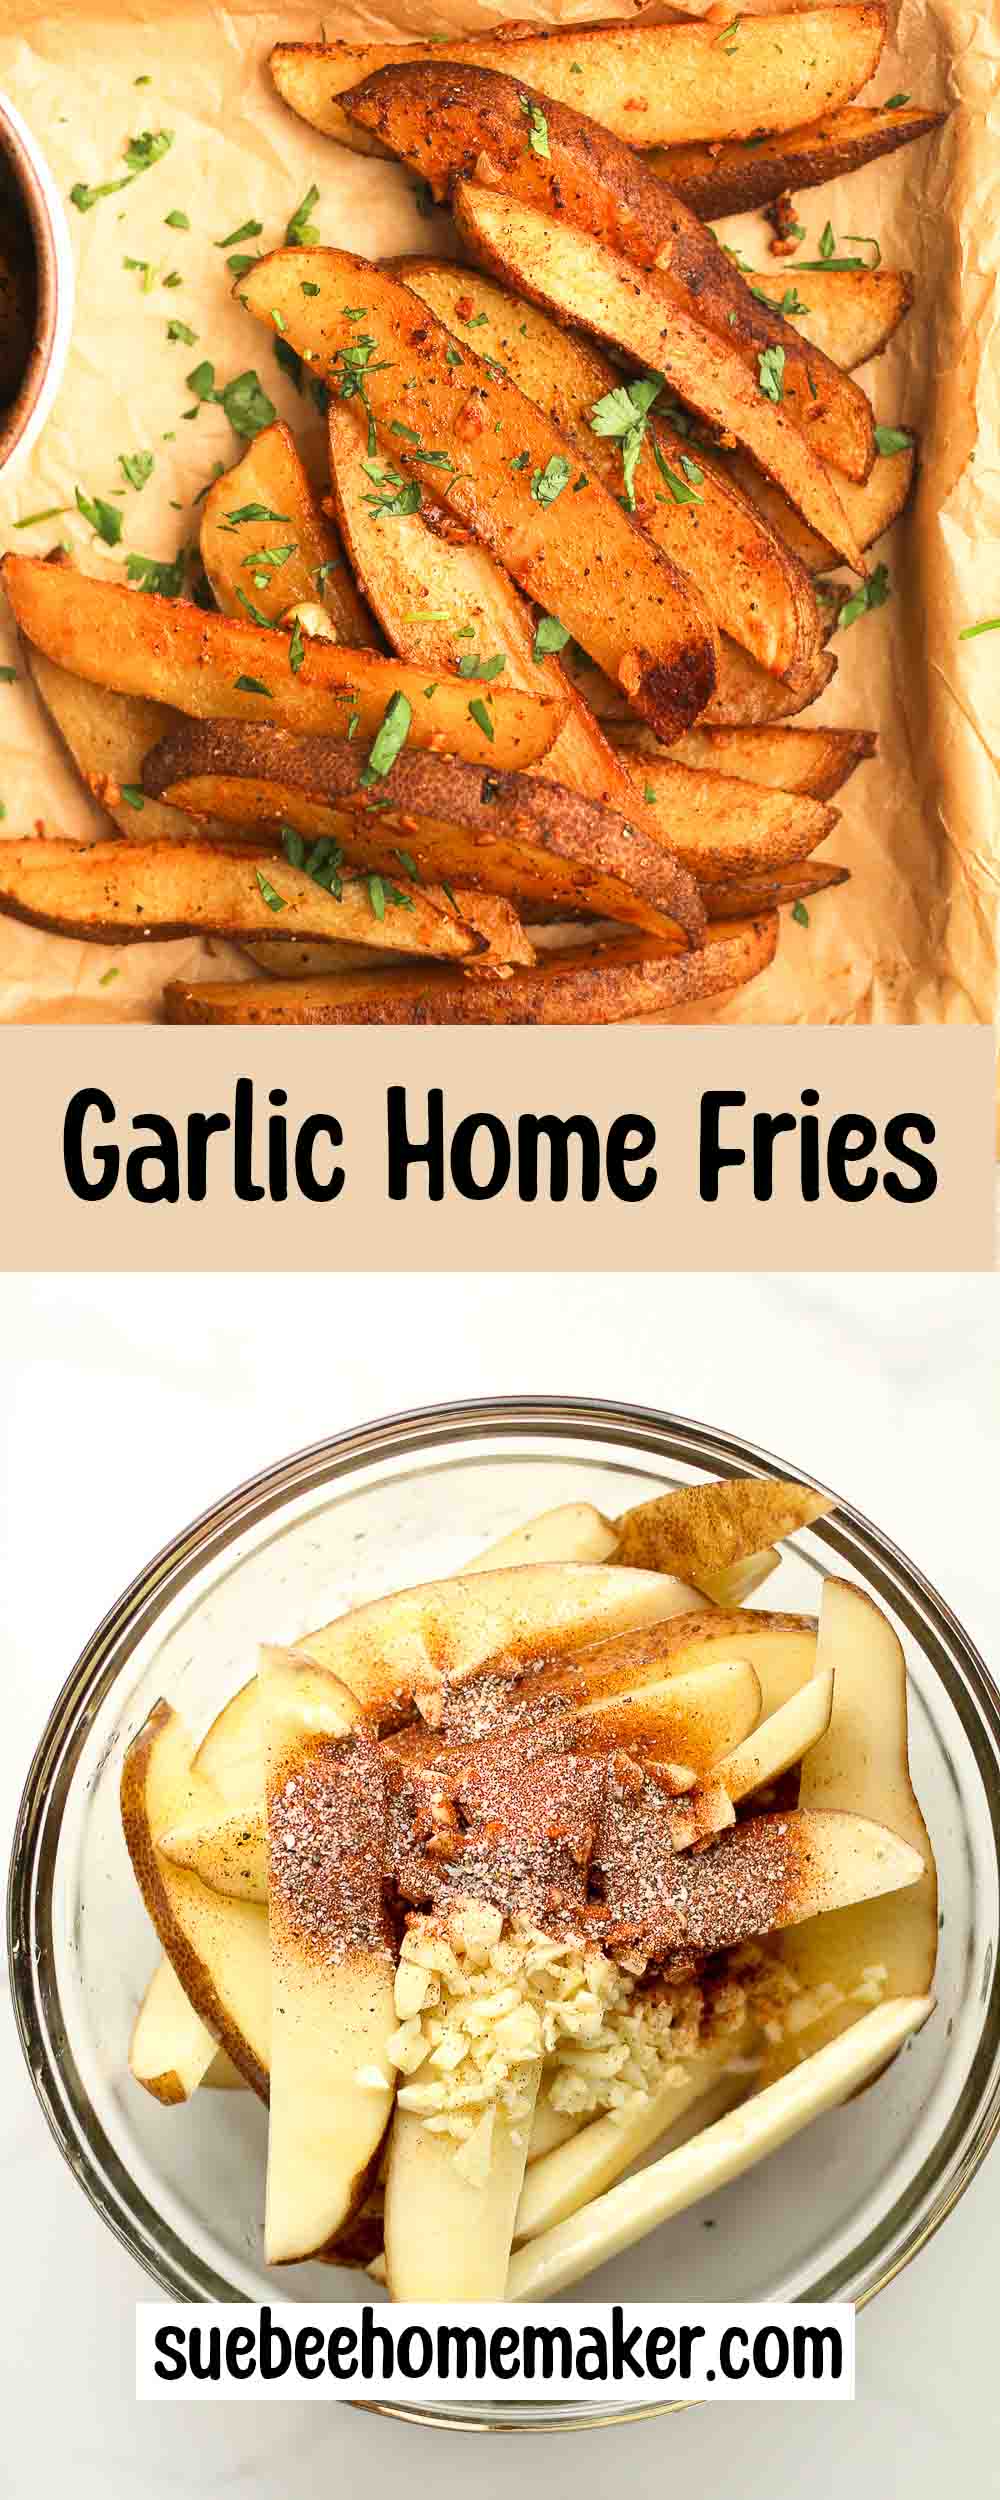 A collage of photos of garlic home fries - one in a pan and the raw fries in a bowl with seasonings.